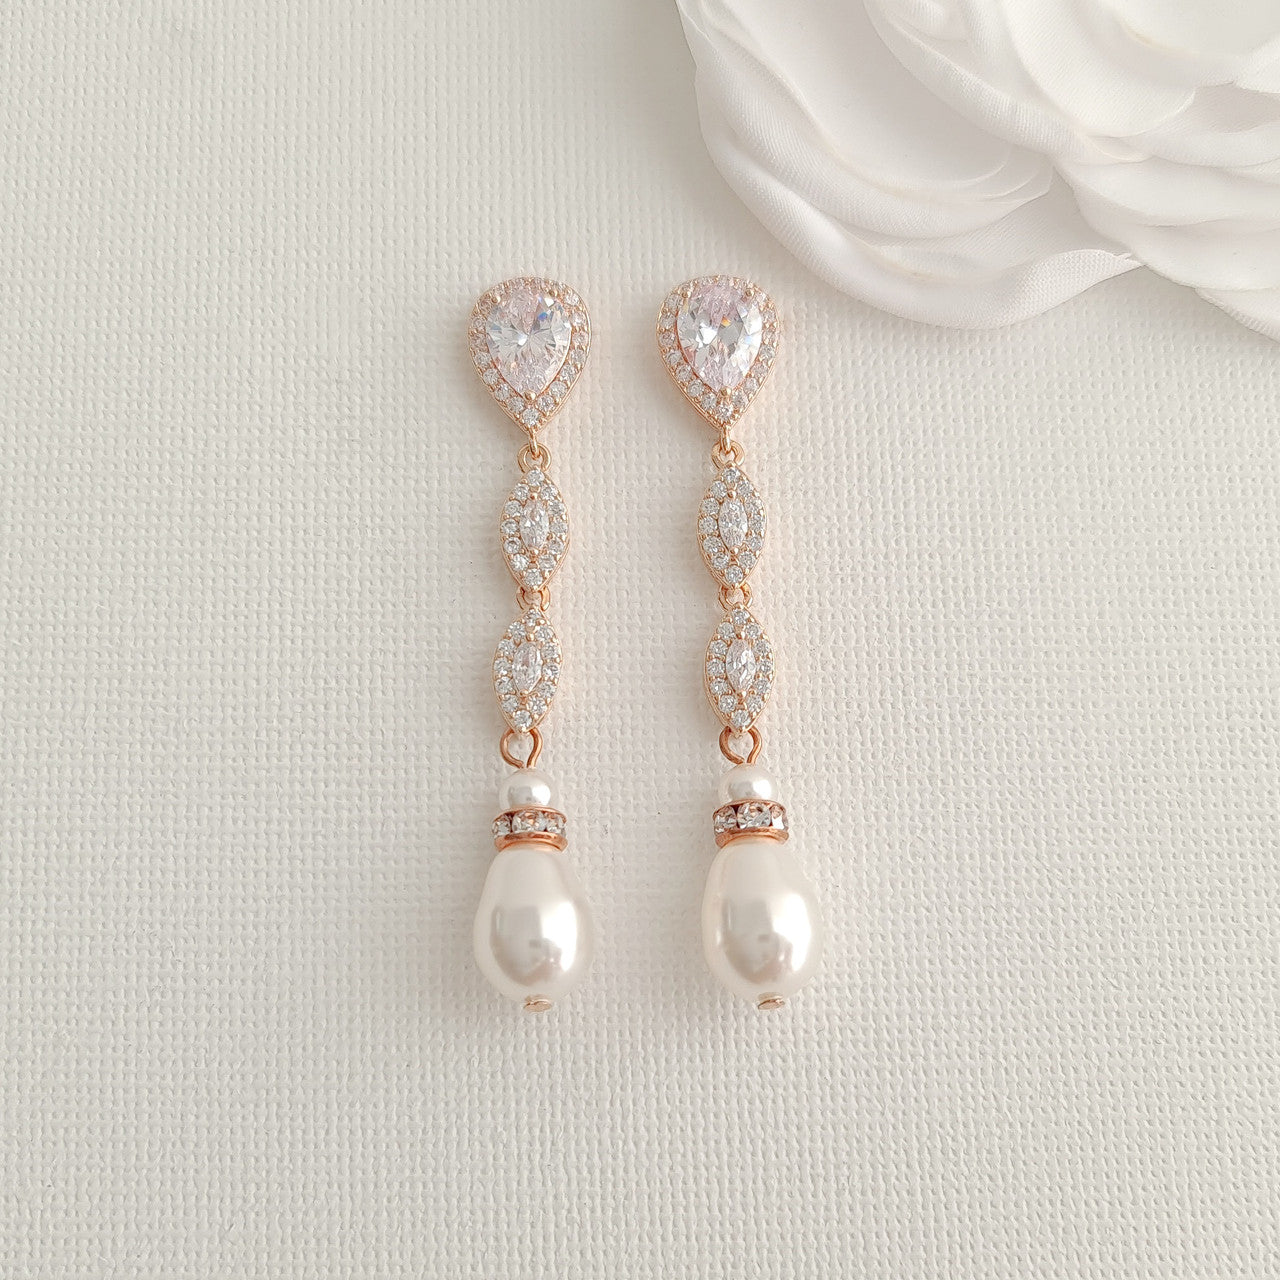 Gold and Pearl Jewellery Set for Wedding-Abby